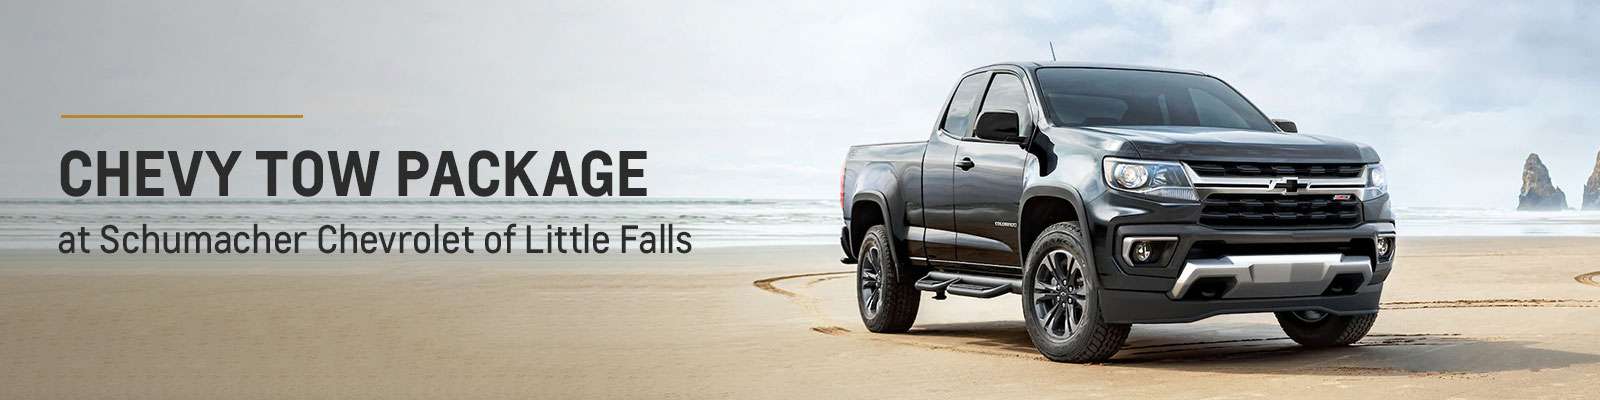 What's Included in the Chevrolet Tow Package? - Schumacher Chevy of Little Falls